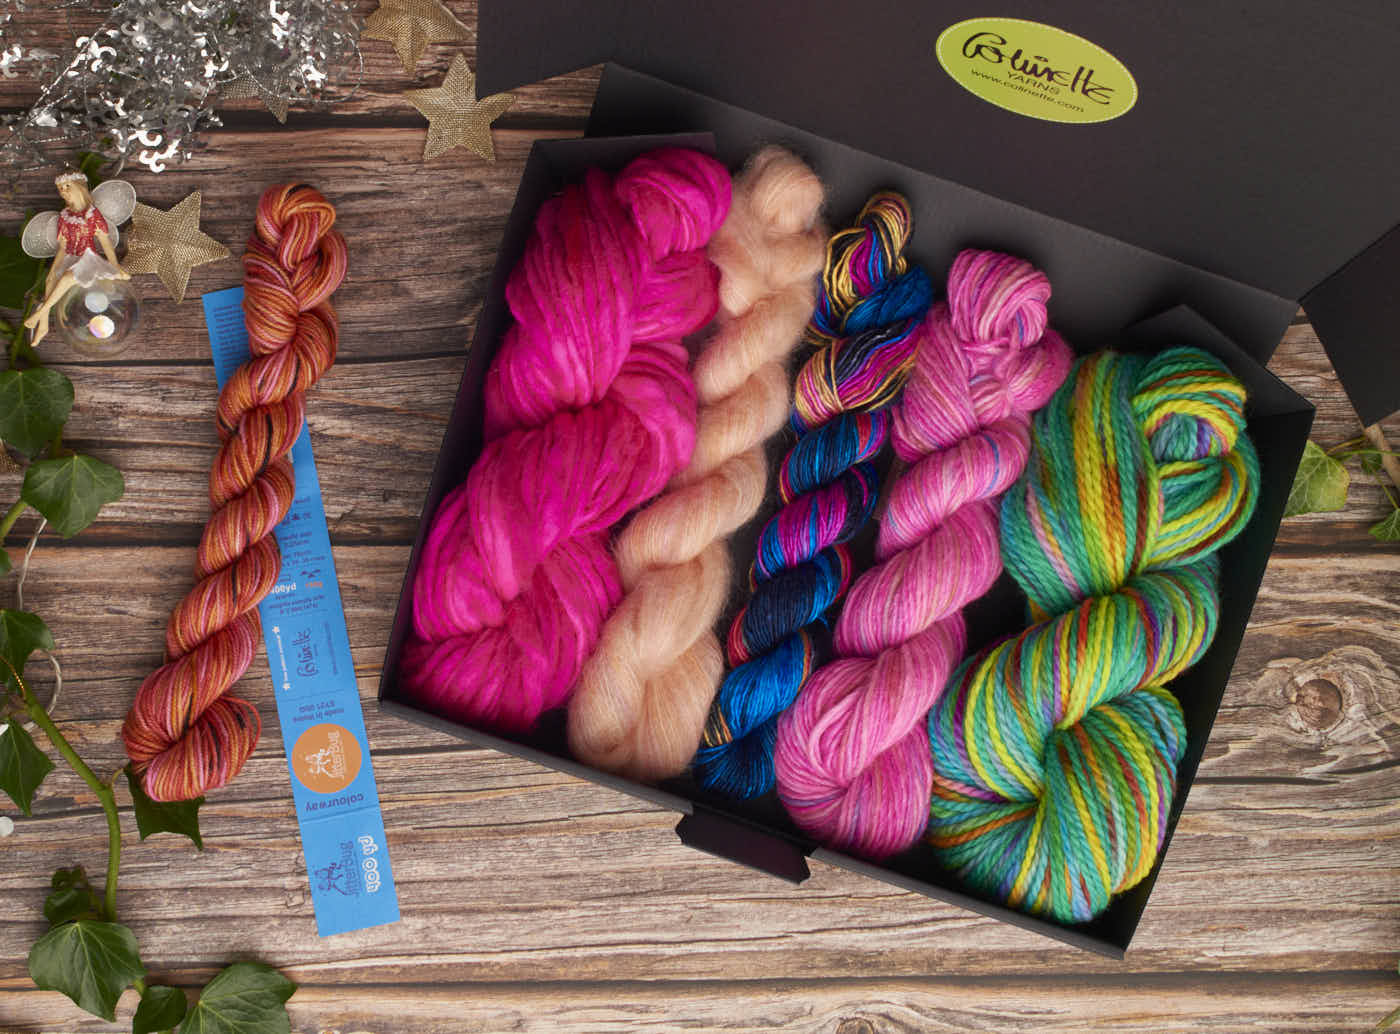 colinette yarns hand dyed yarn Christmas boxes shades Pop